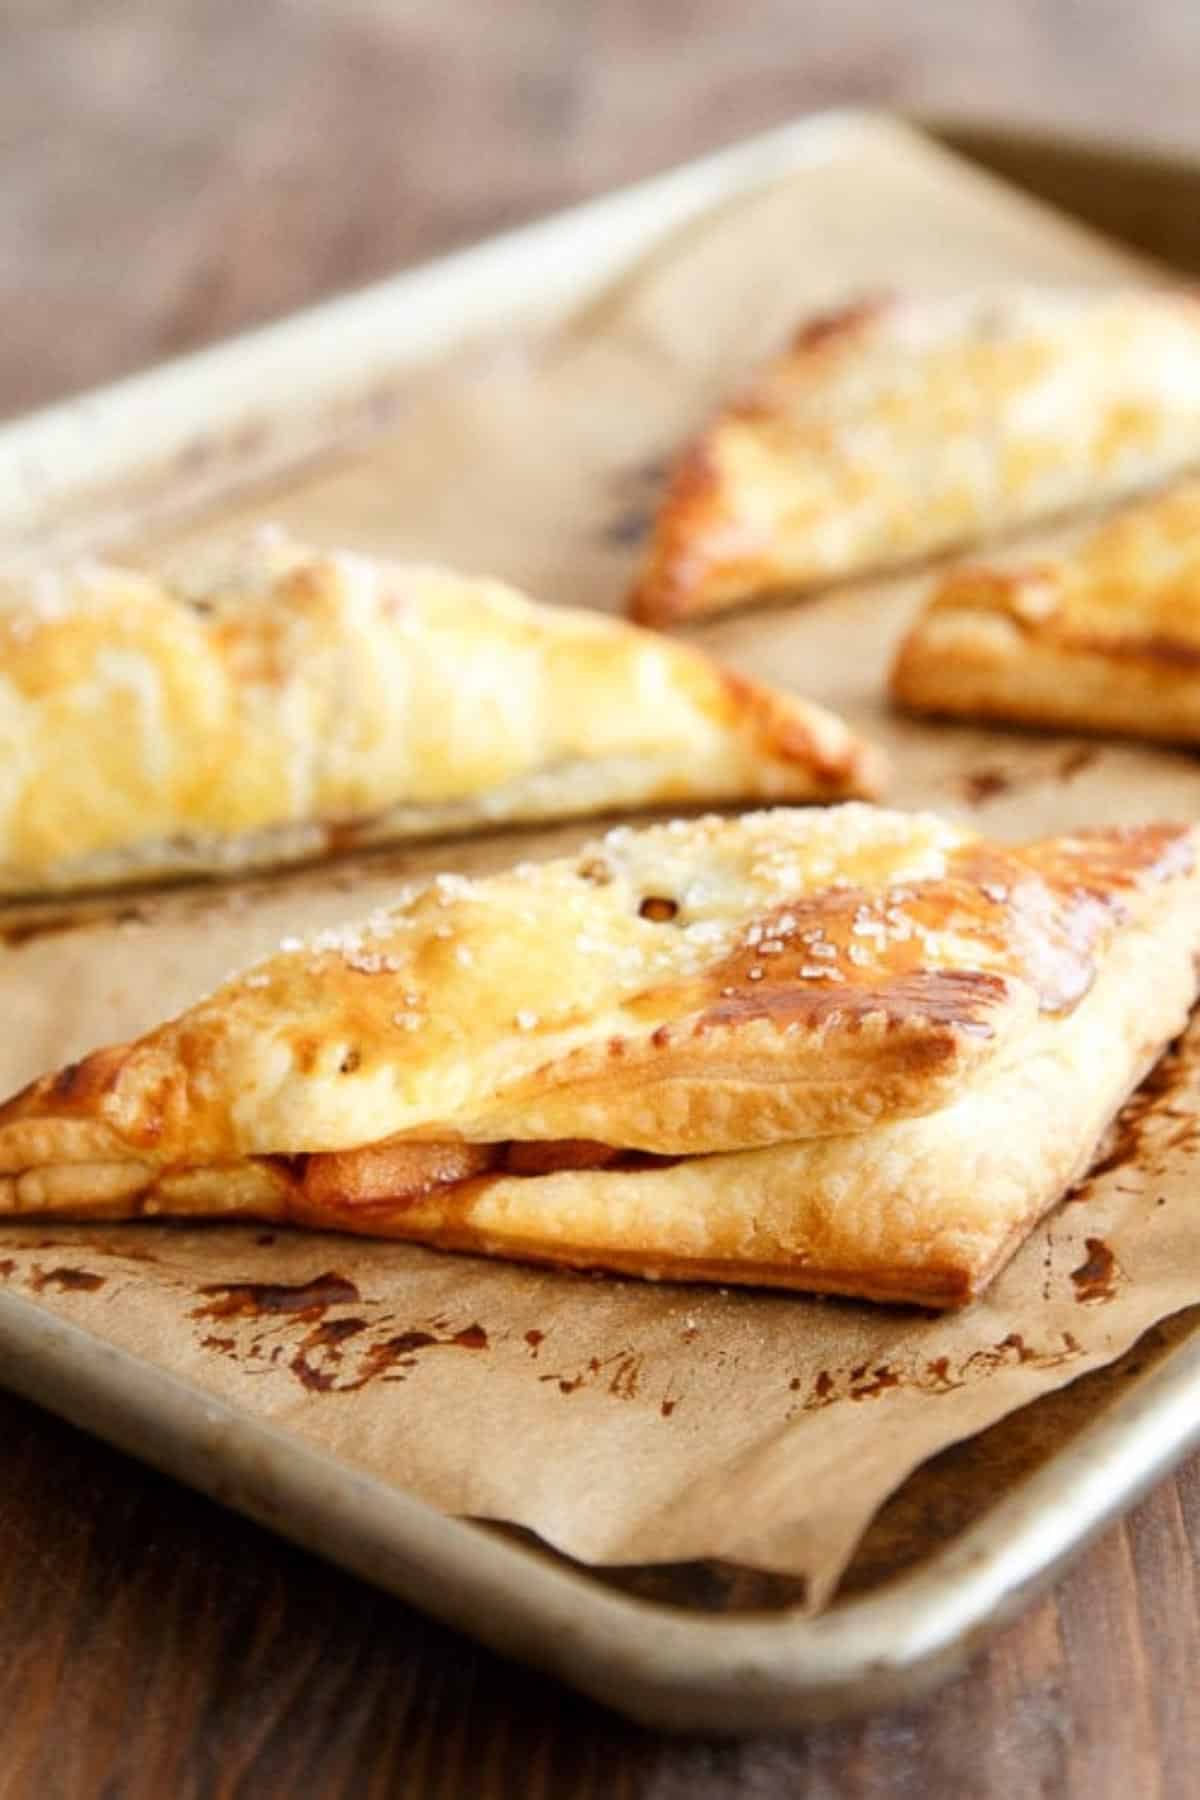 Freshly cooked apple turnovers on baking sheet with brown parchment paper.